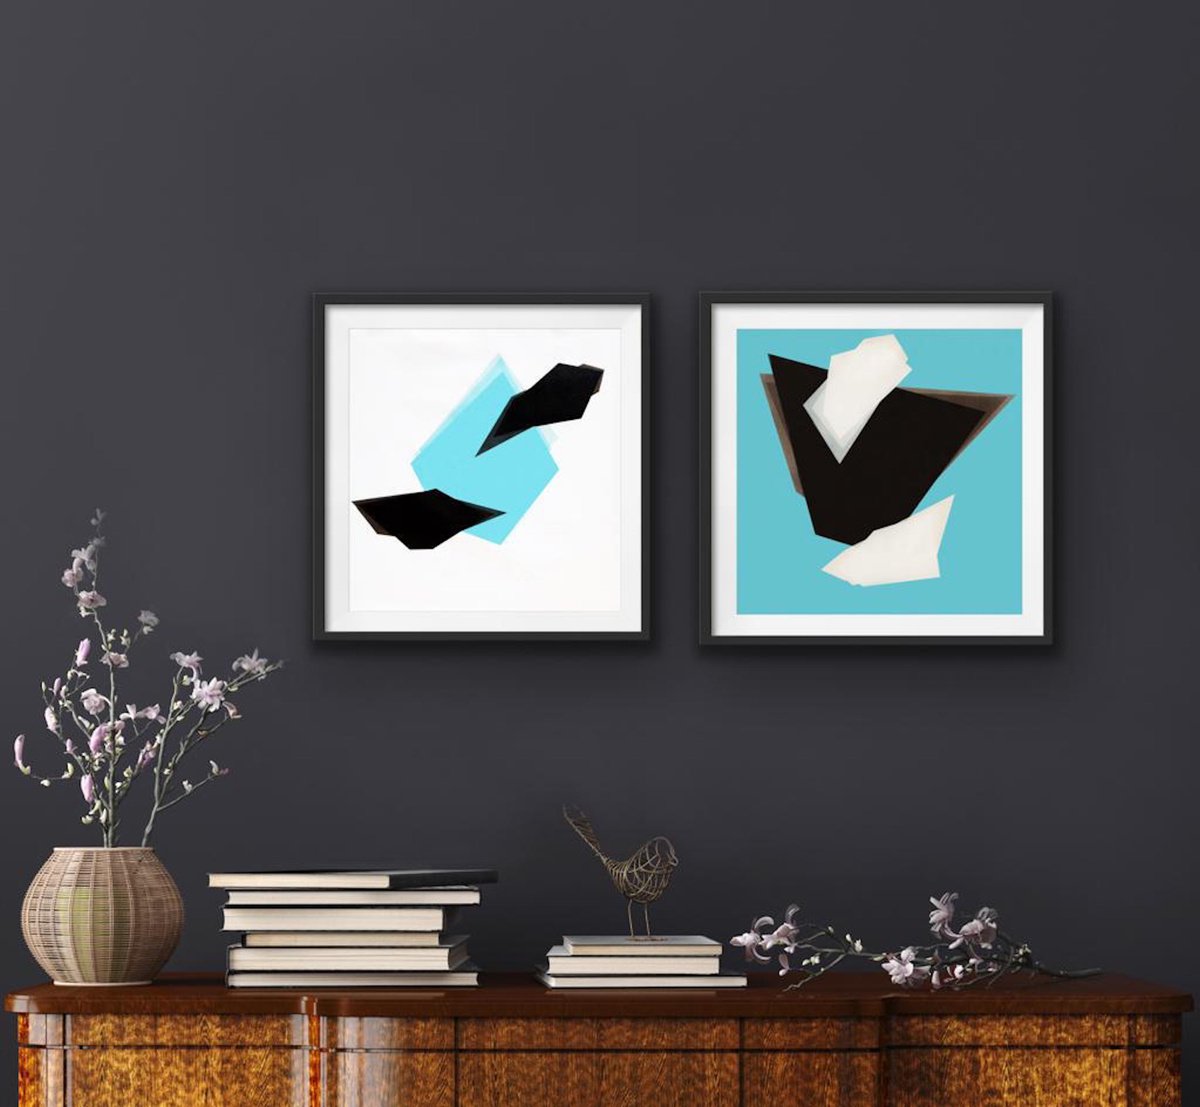 Three Geometric Color 3 - Diptych by Catia Goffinet